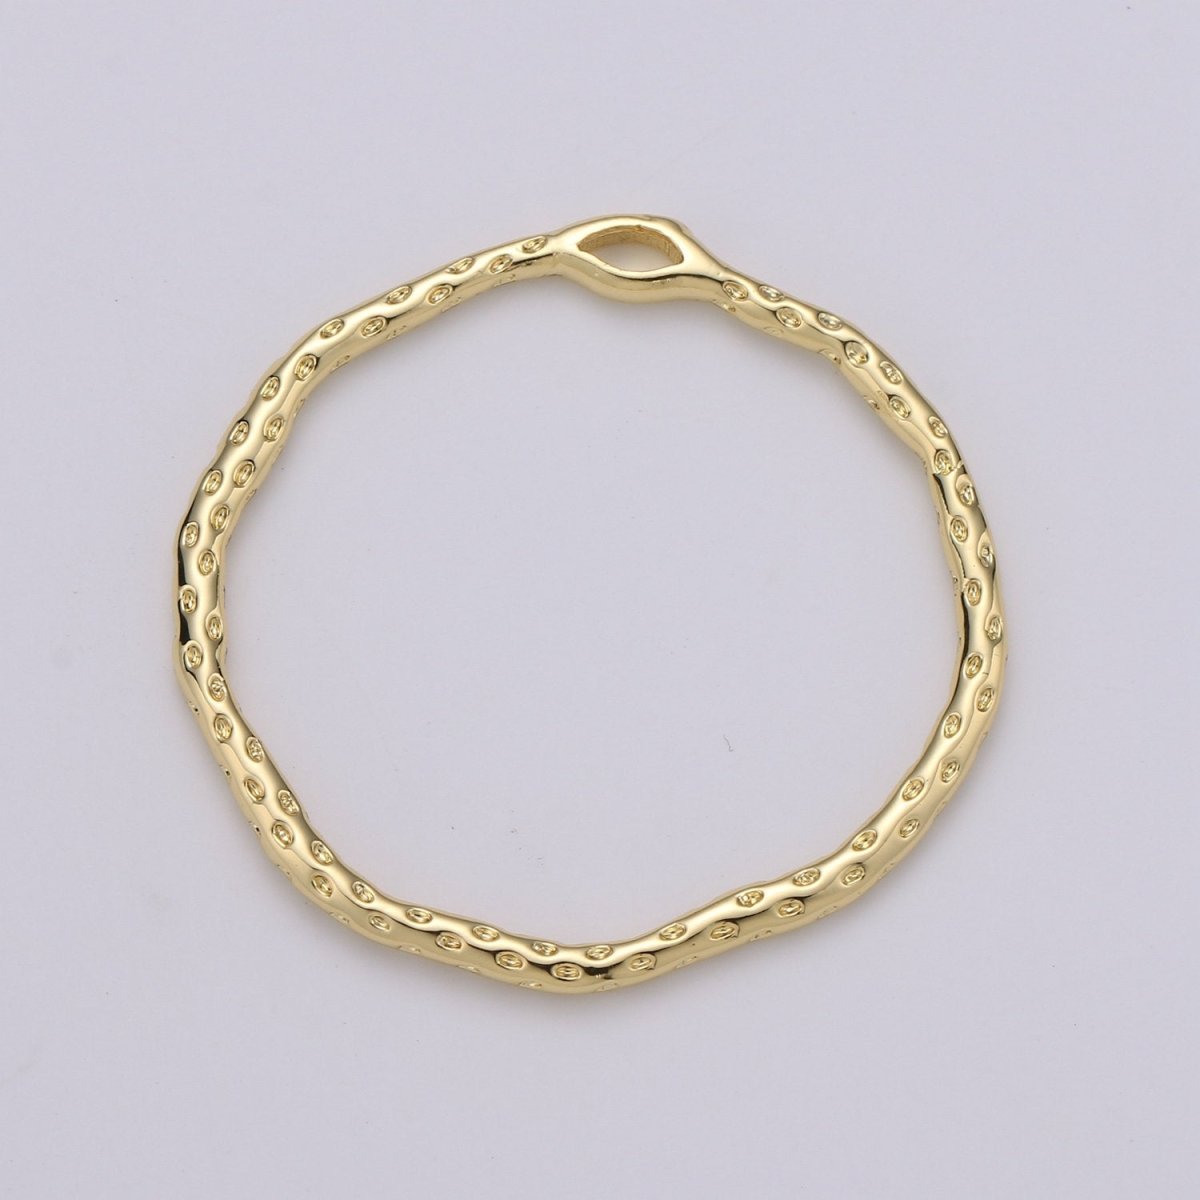 Dainty Hammered Circle Pendant, Round Charm 14k Gold filled 30mm rustic round charm K-899 - DLUXCA